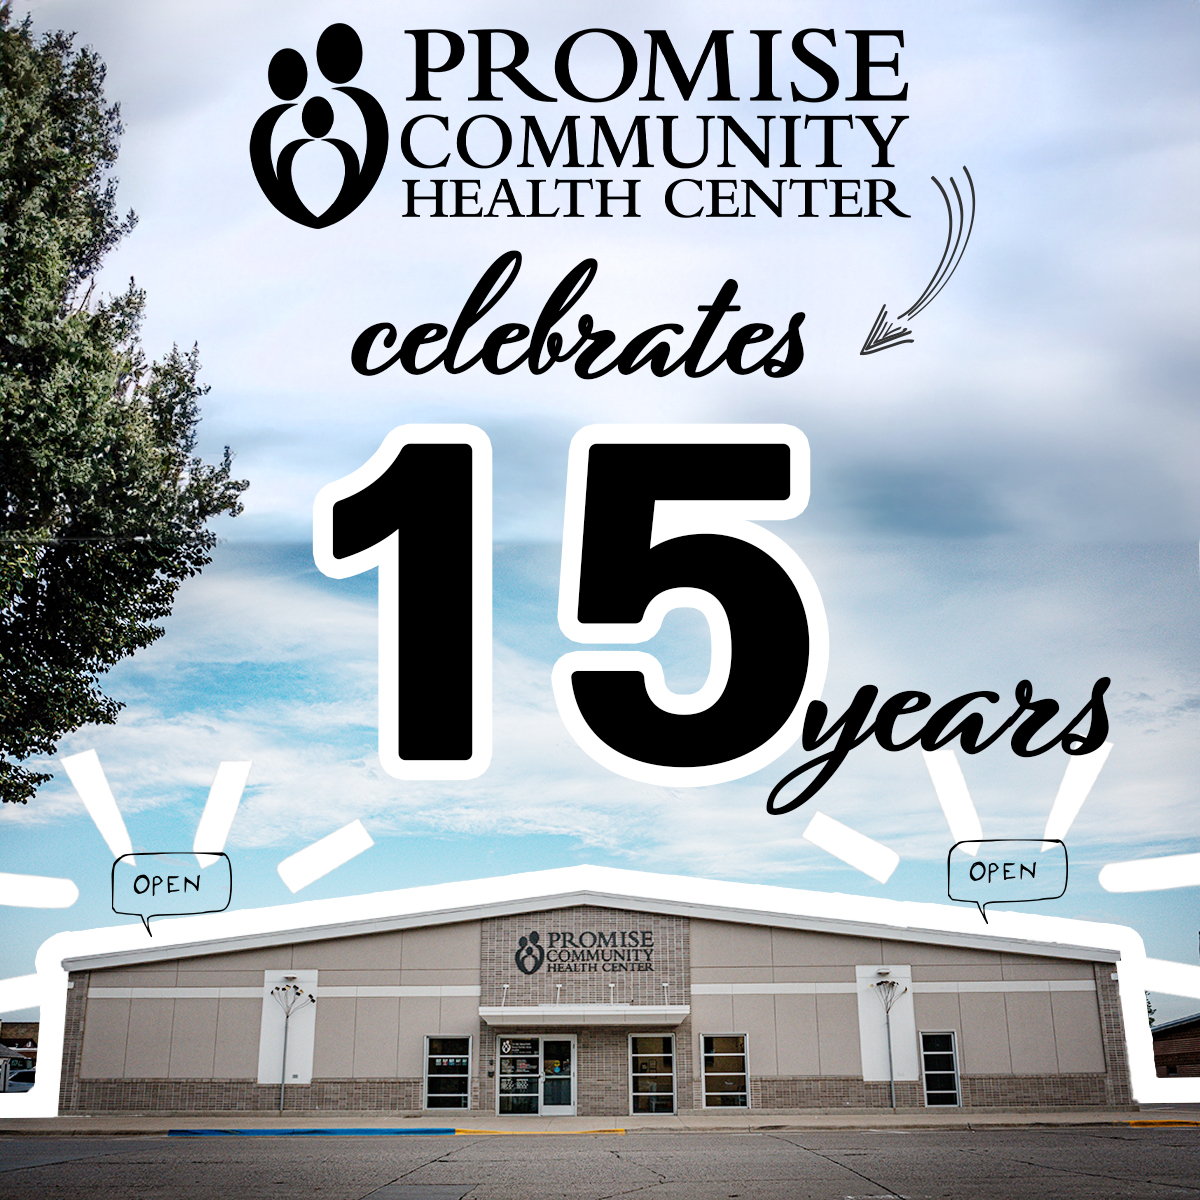 15th Anniversary | Promise Community Health Center, medical clinic near me, medical care near me, prenatal care near me, behavioral healthcare near me, therapist near me, doctor near me, nurse near me, nurse health coaching near me, nurse practitioner near me, translator near me, dentist near me, optometrist near me, lab services near me, immunizations near me, outreach services near me, midwives near me, home birth near me, health care near me